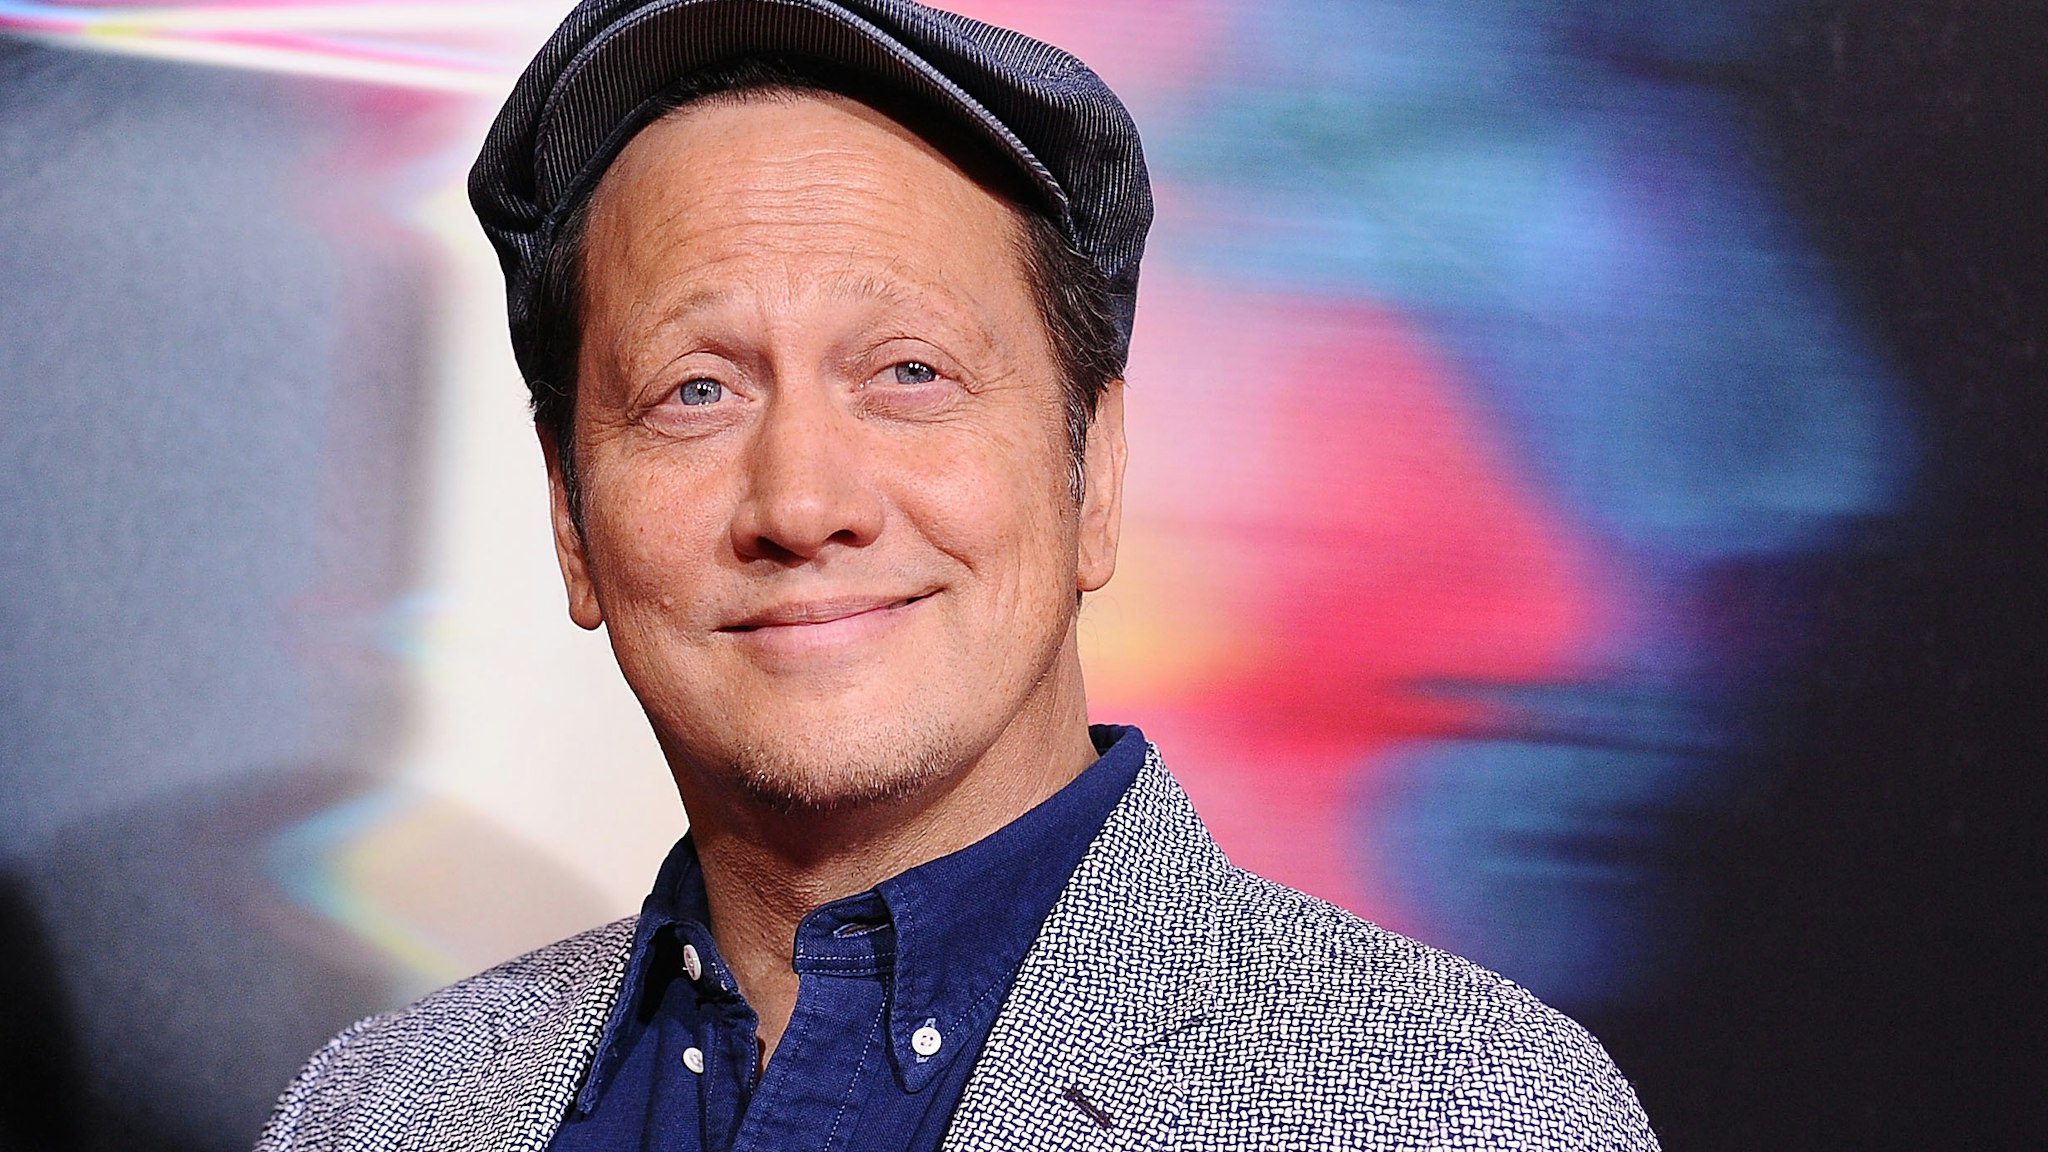 LOS ANGELES, CA - SEPTEMBER 27: Actor Rob Schneider attends the premiere of "Flatliners" at The Theatre at Ace Hotel on September 27, 2017 in Los Angeles, California. (Photo by Jason LaVeris/FilmMagic)